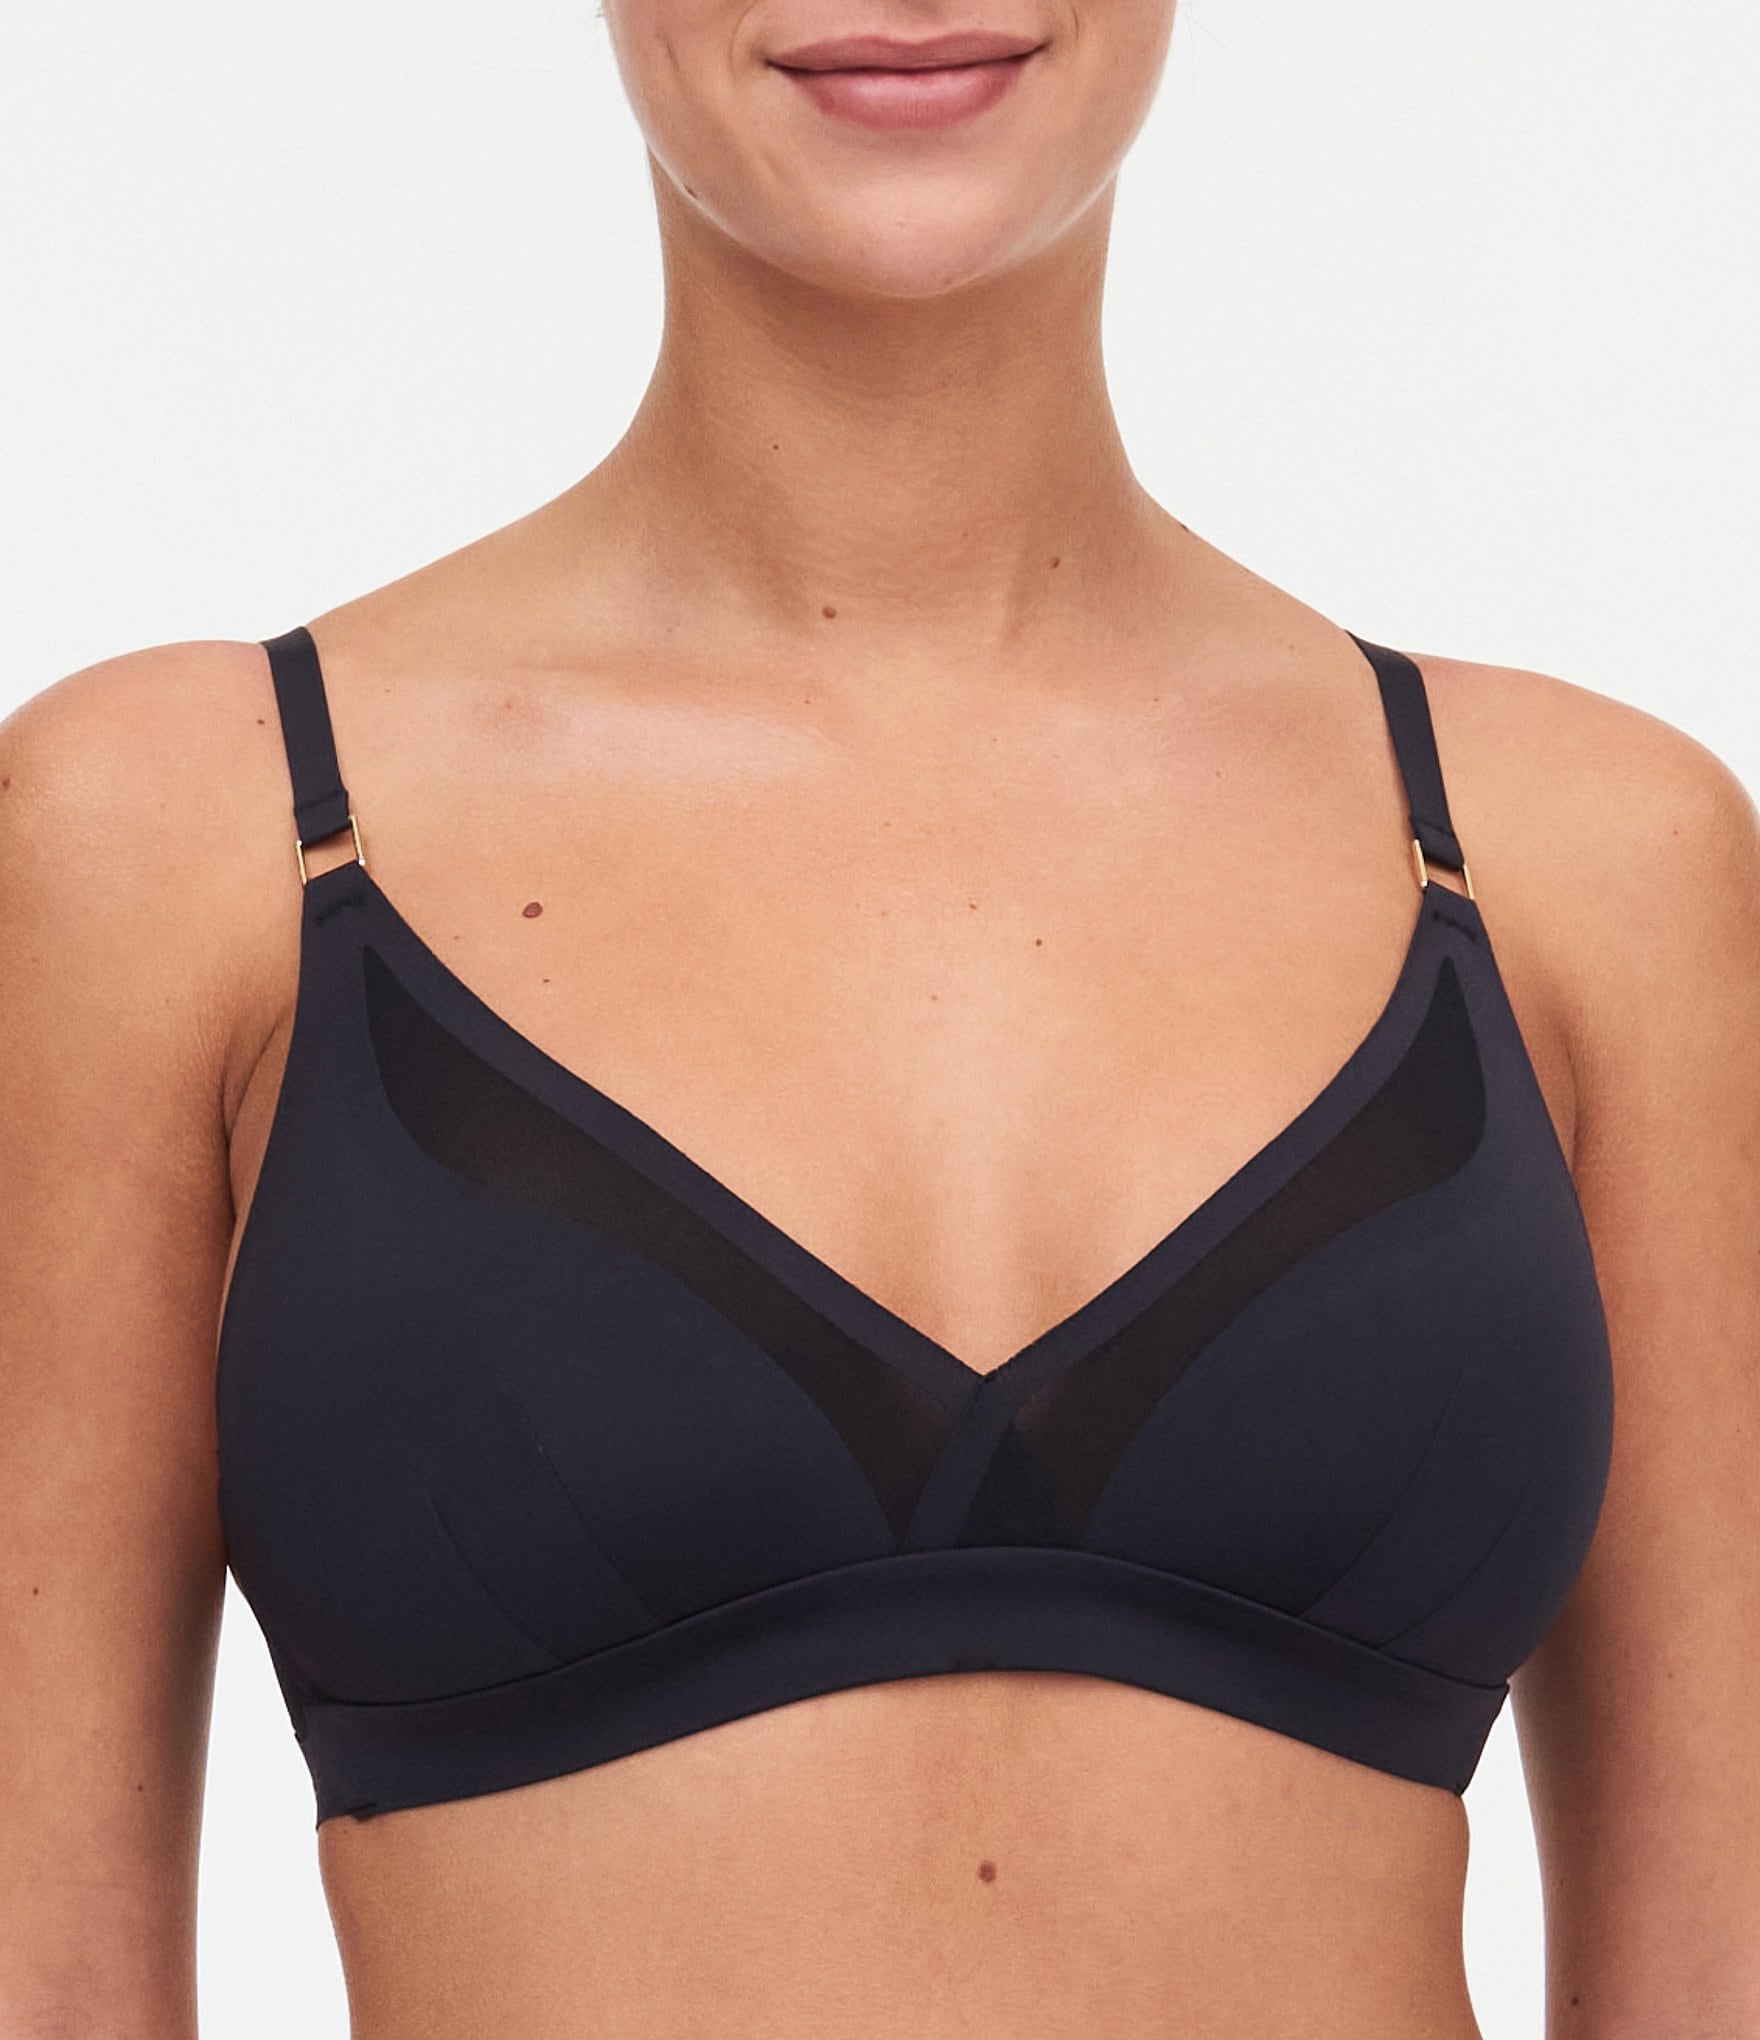 Bra FB-PL Bella  BRAS \ Soft Cup Bras with Underwire BRAS \ Multiway Bras  with Convertible Straps BRAS \ ALL BRAS \ Bras for Narrow Shoulders BRAS \  Bras for Very